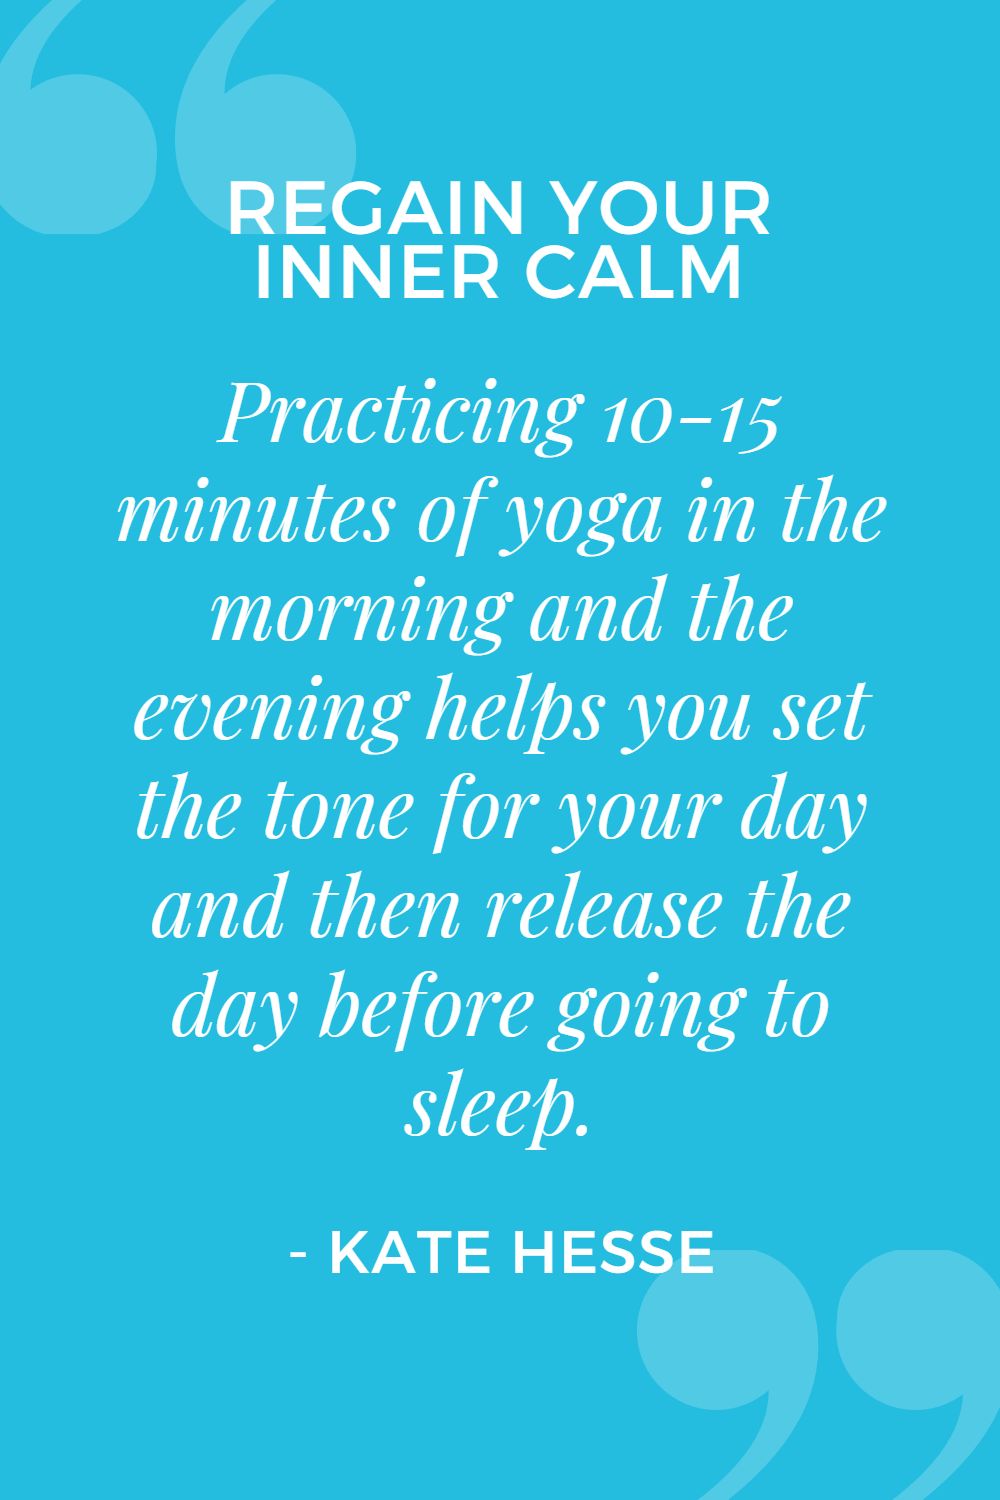 Practicing 10-15 minutes of yoga in the morning and the evening helps you set the tone for your day and then release the day before going to sleep.